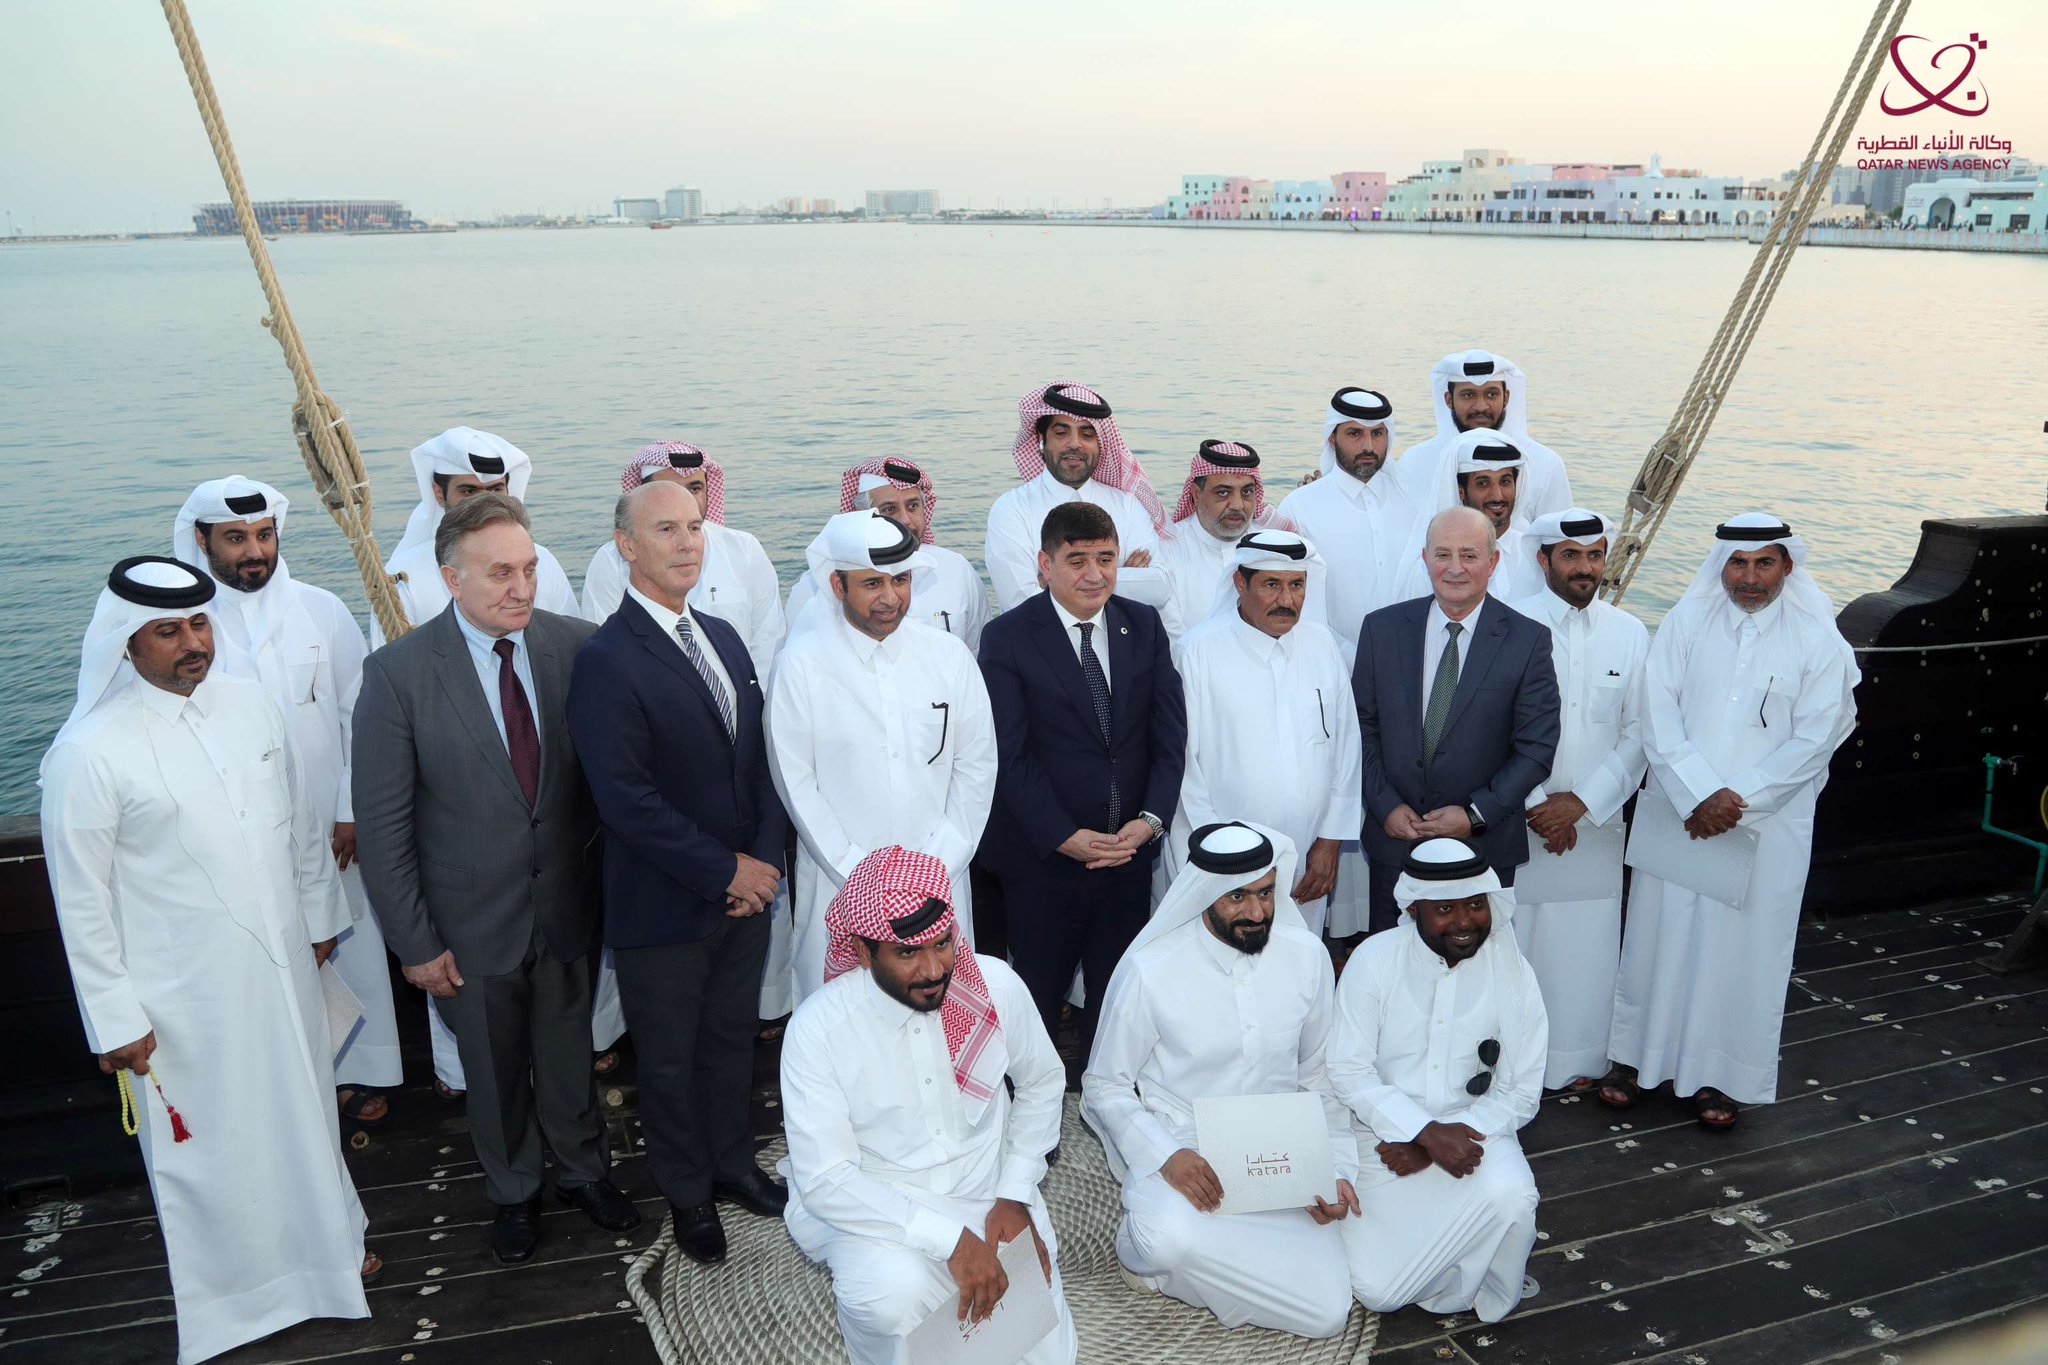 After Five-Year Voyage … Fath Al Khair Cruise Makes Final Docking in Old Doha Port